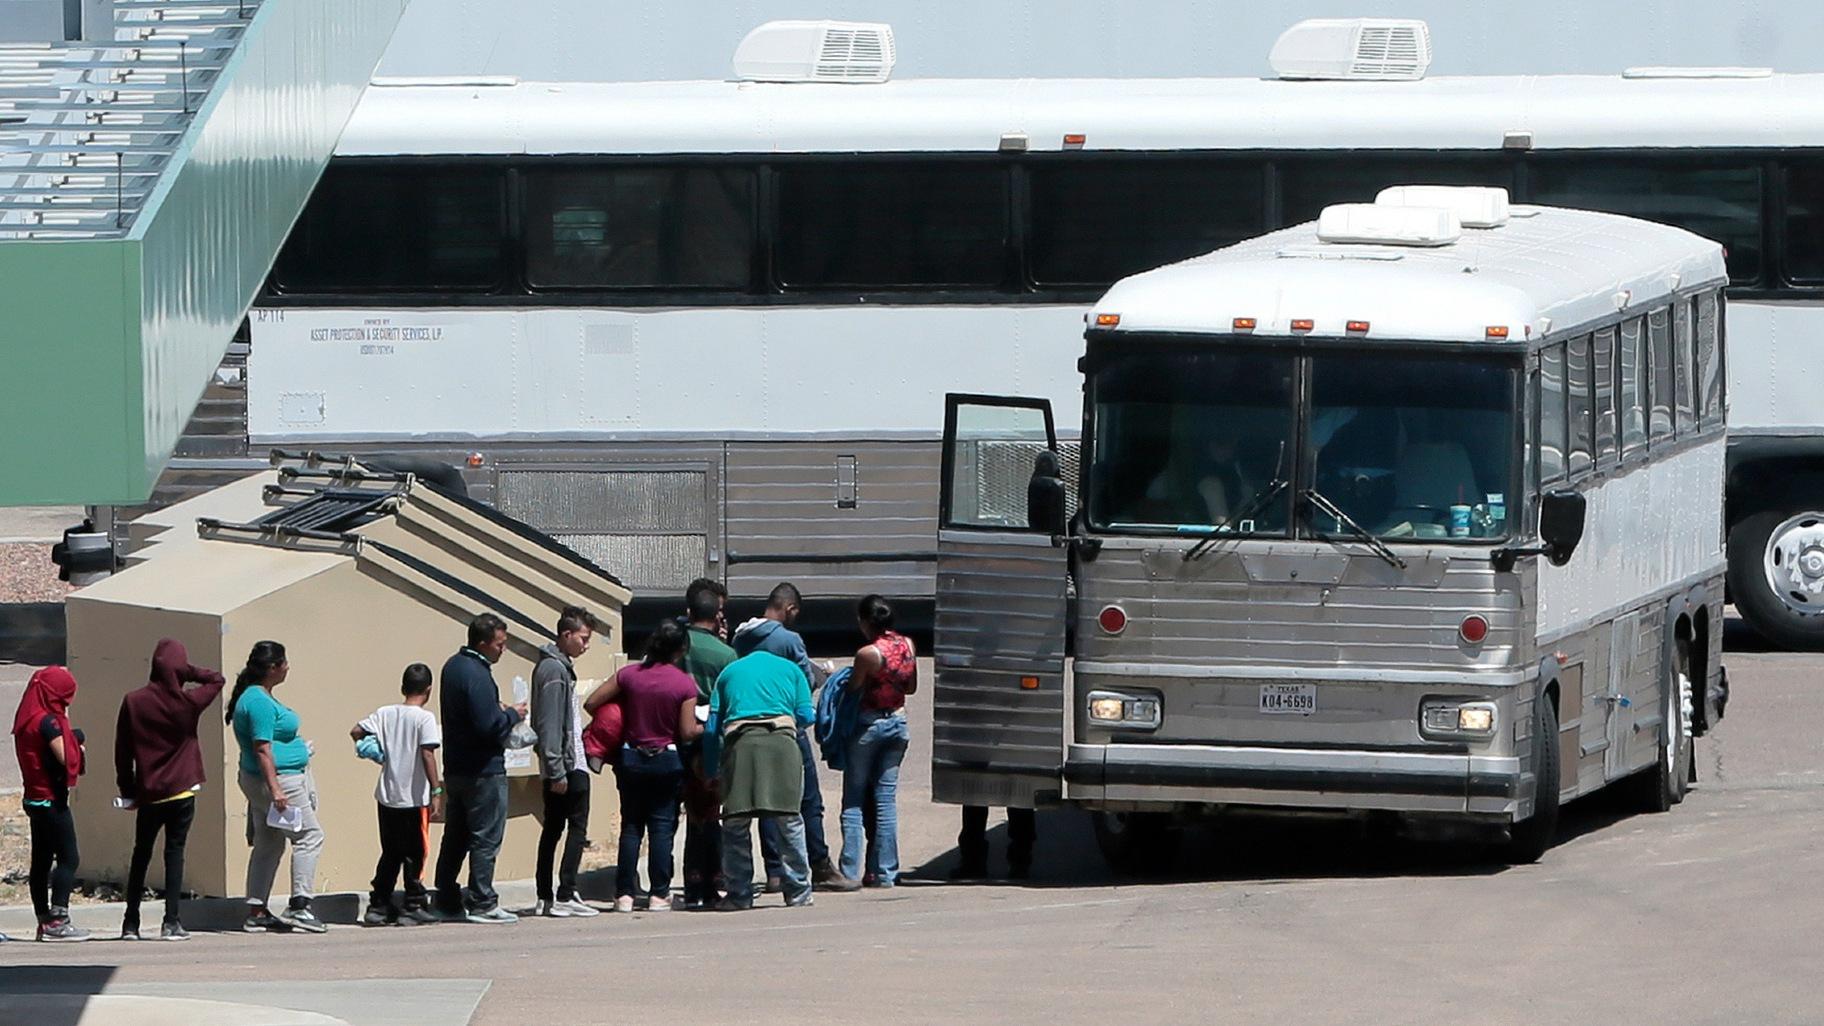 FILE - In this April 20, 2019 file photo, migrants are loaded onto a bus at the Border Patrol headquarters on Hondo Pass, in El Paso, Texas. (Mark Lambie / The El Paso Times via AP, File)